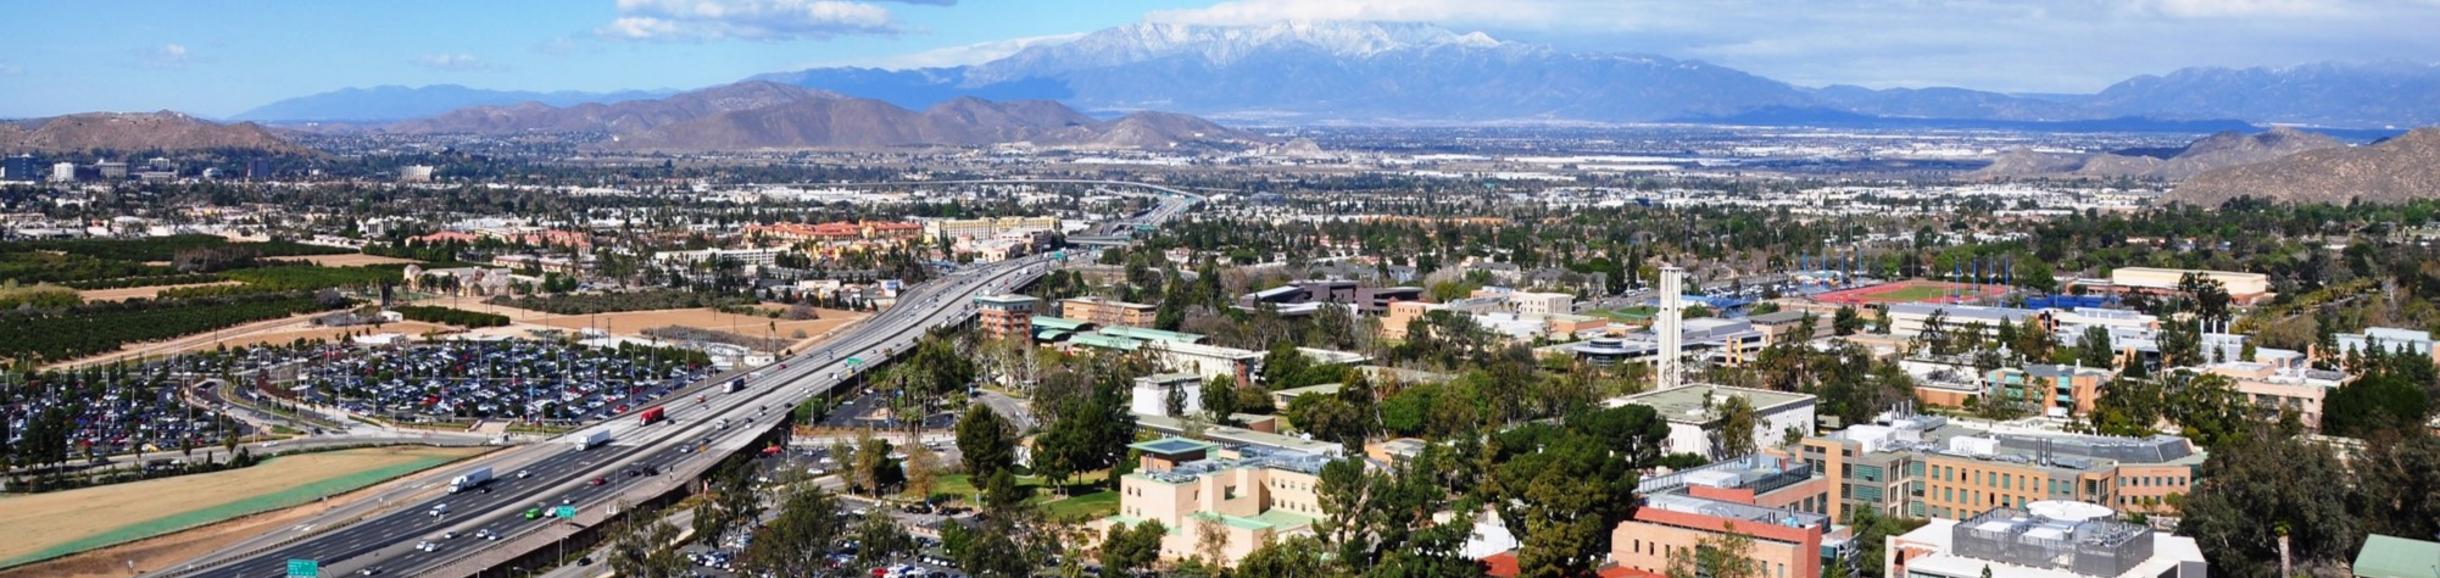 UCR Campus seen from above